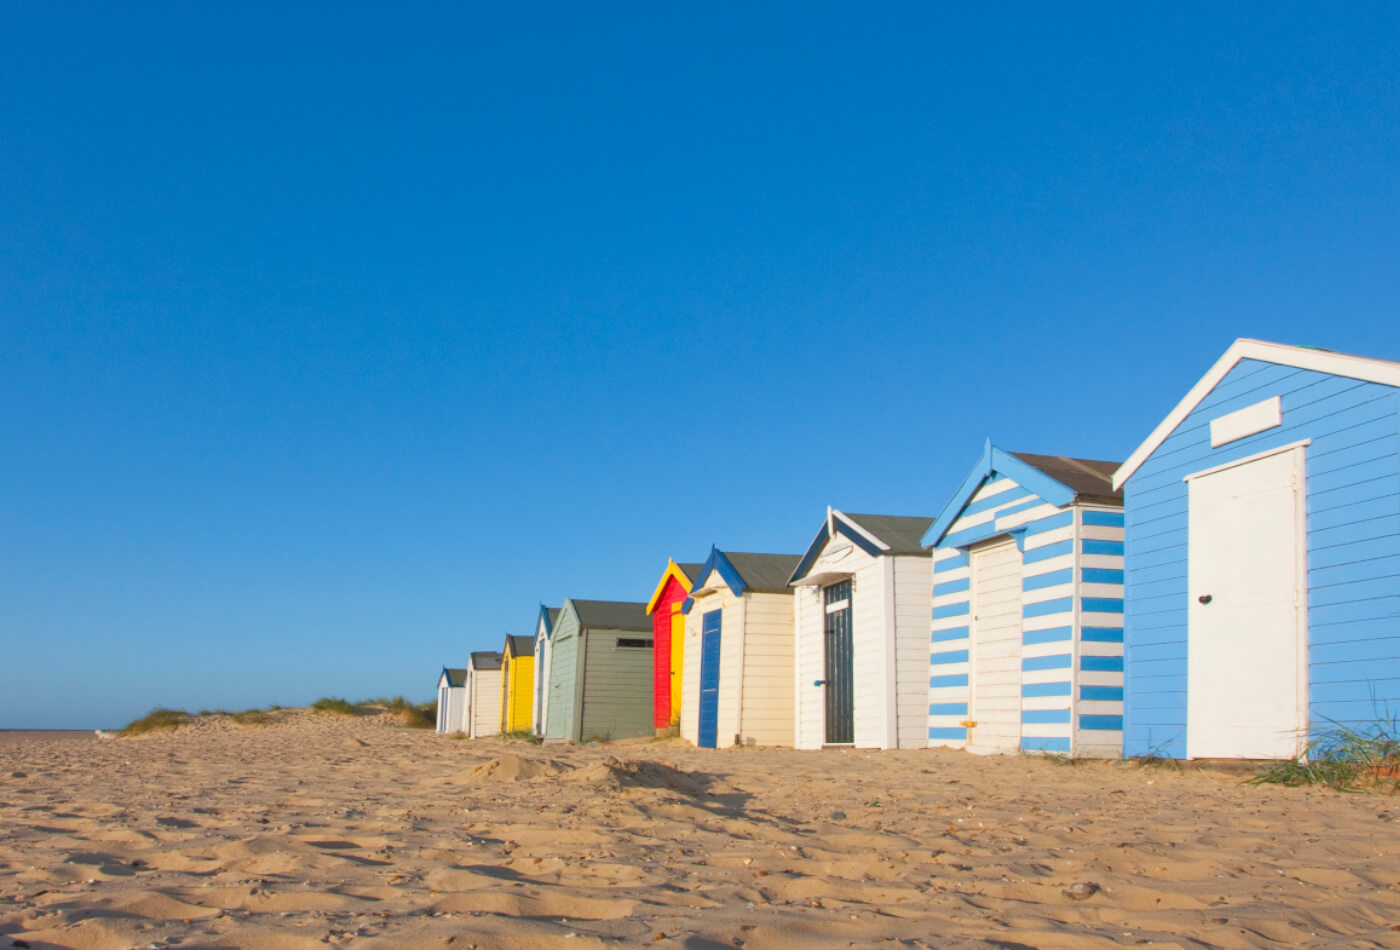 suffolk beaches feature image